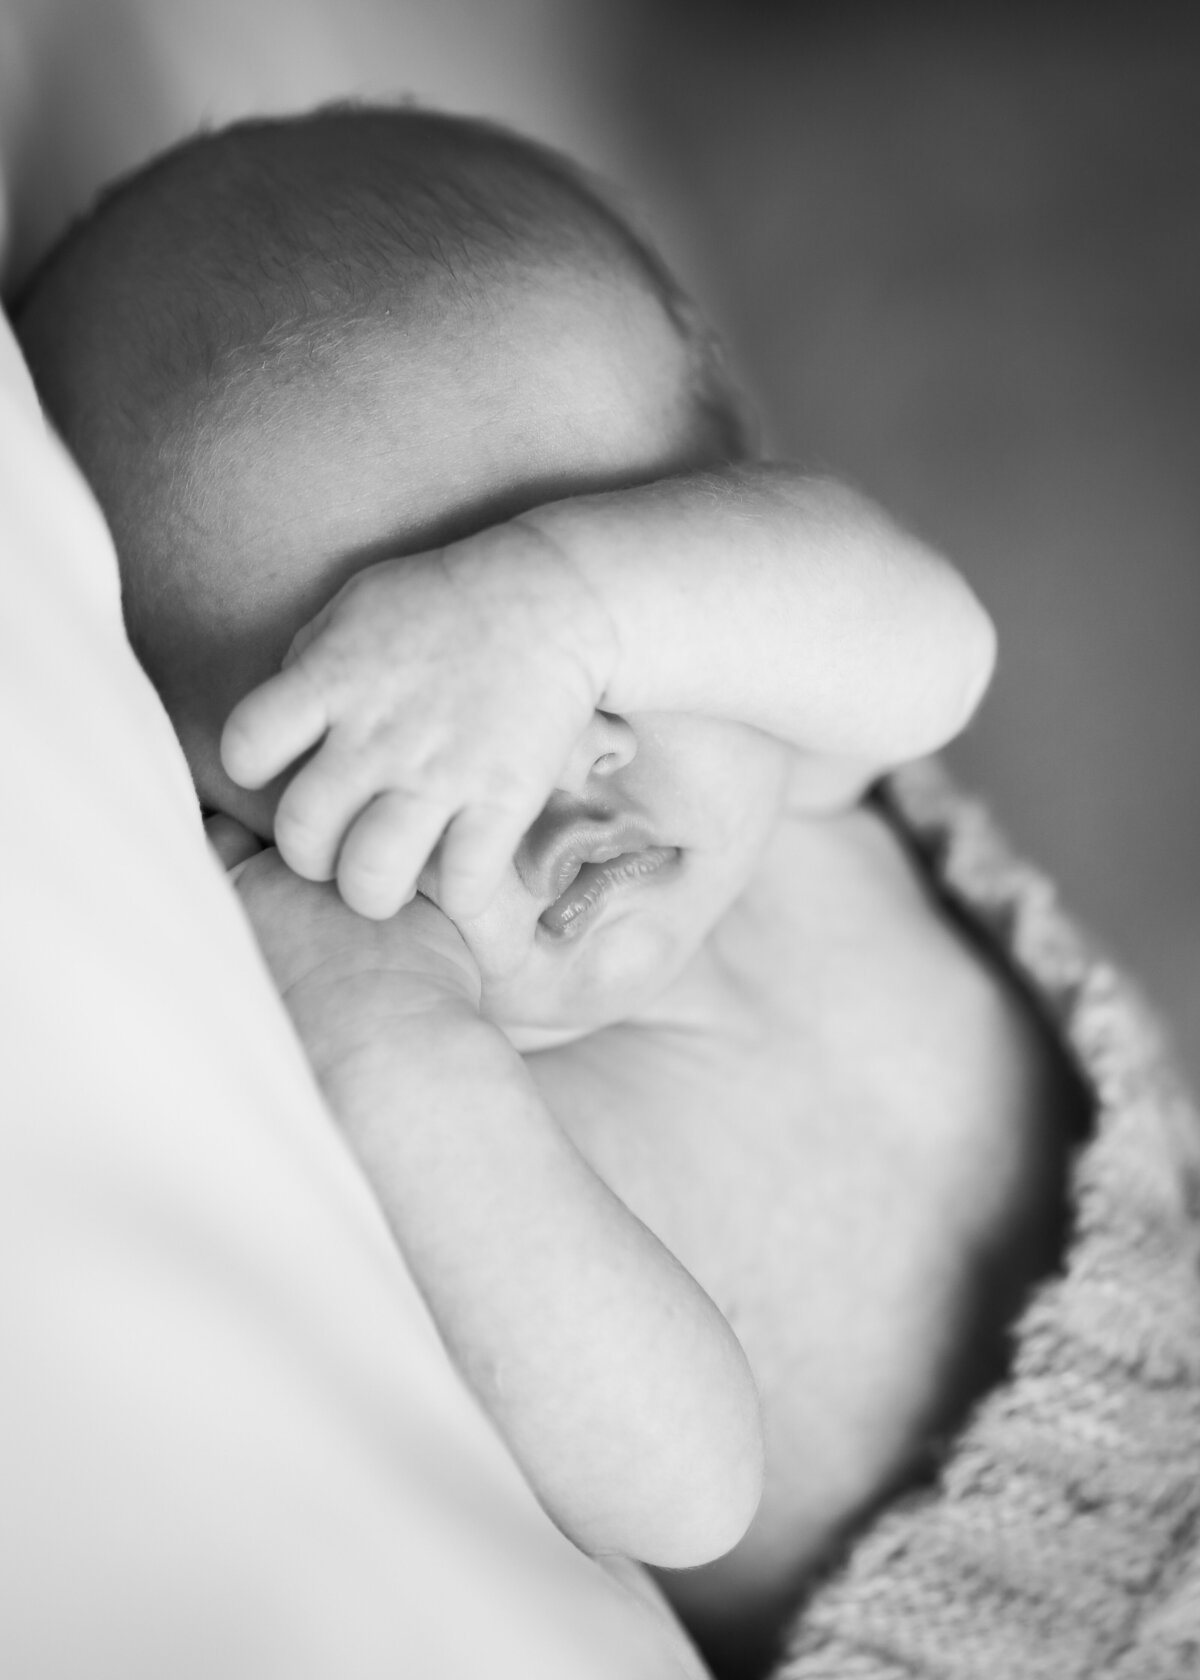 Vanessa is an experienced newborn photographer based outside of Haslemere in Surrey.